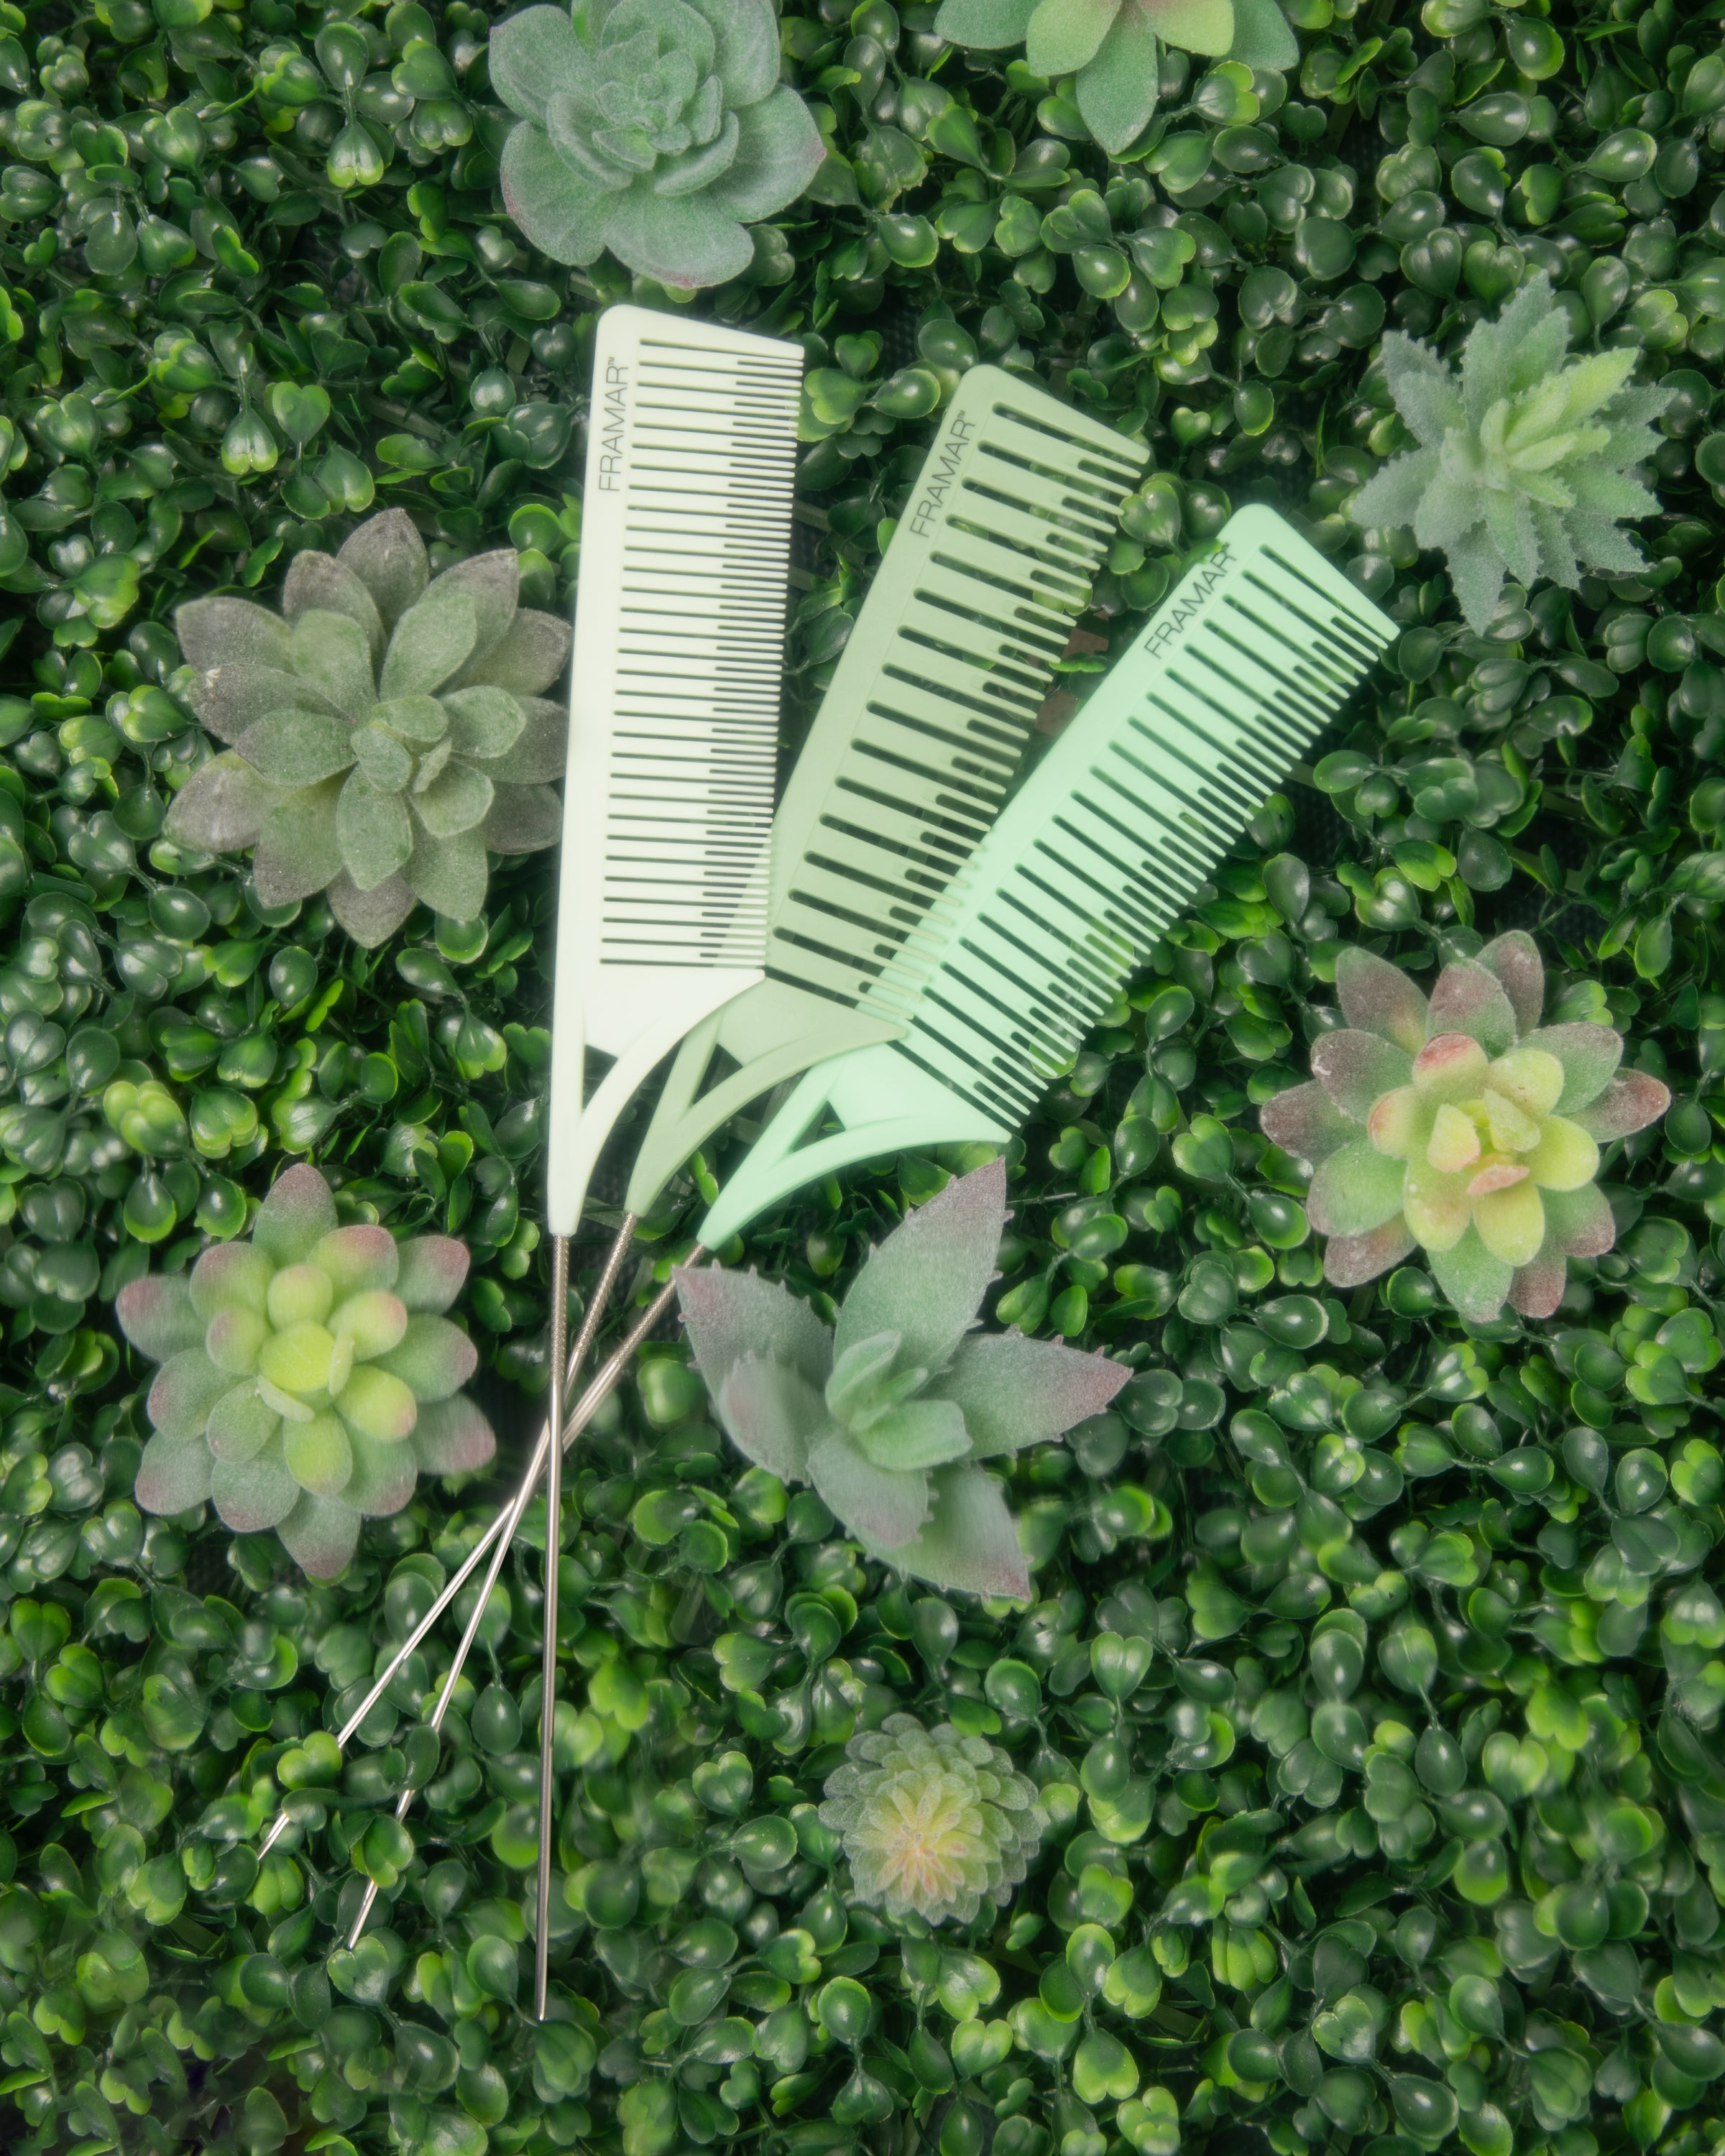 Hair combs and pins on a background of artificial green succulents.